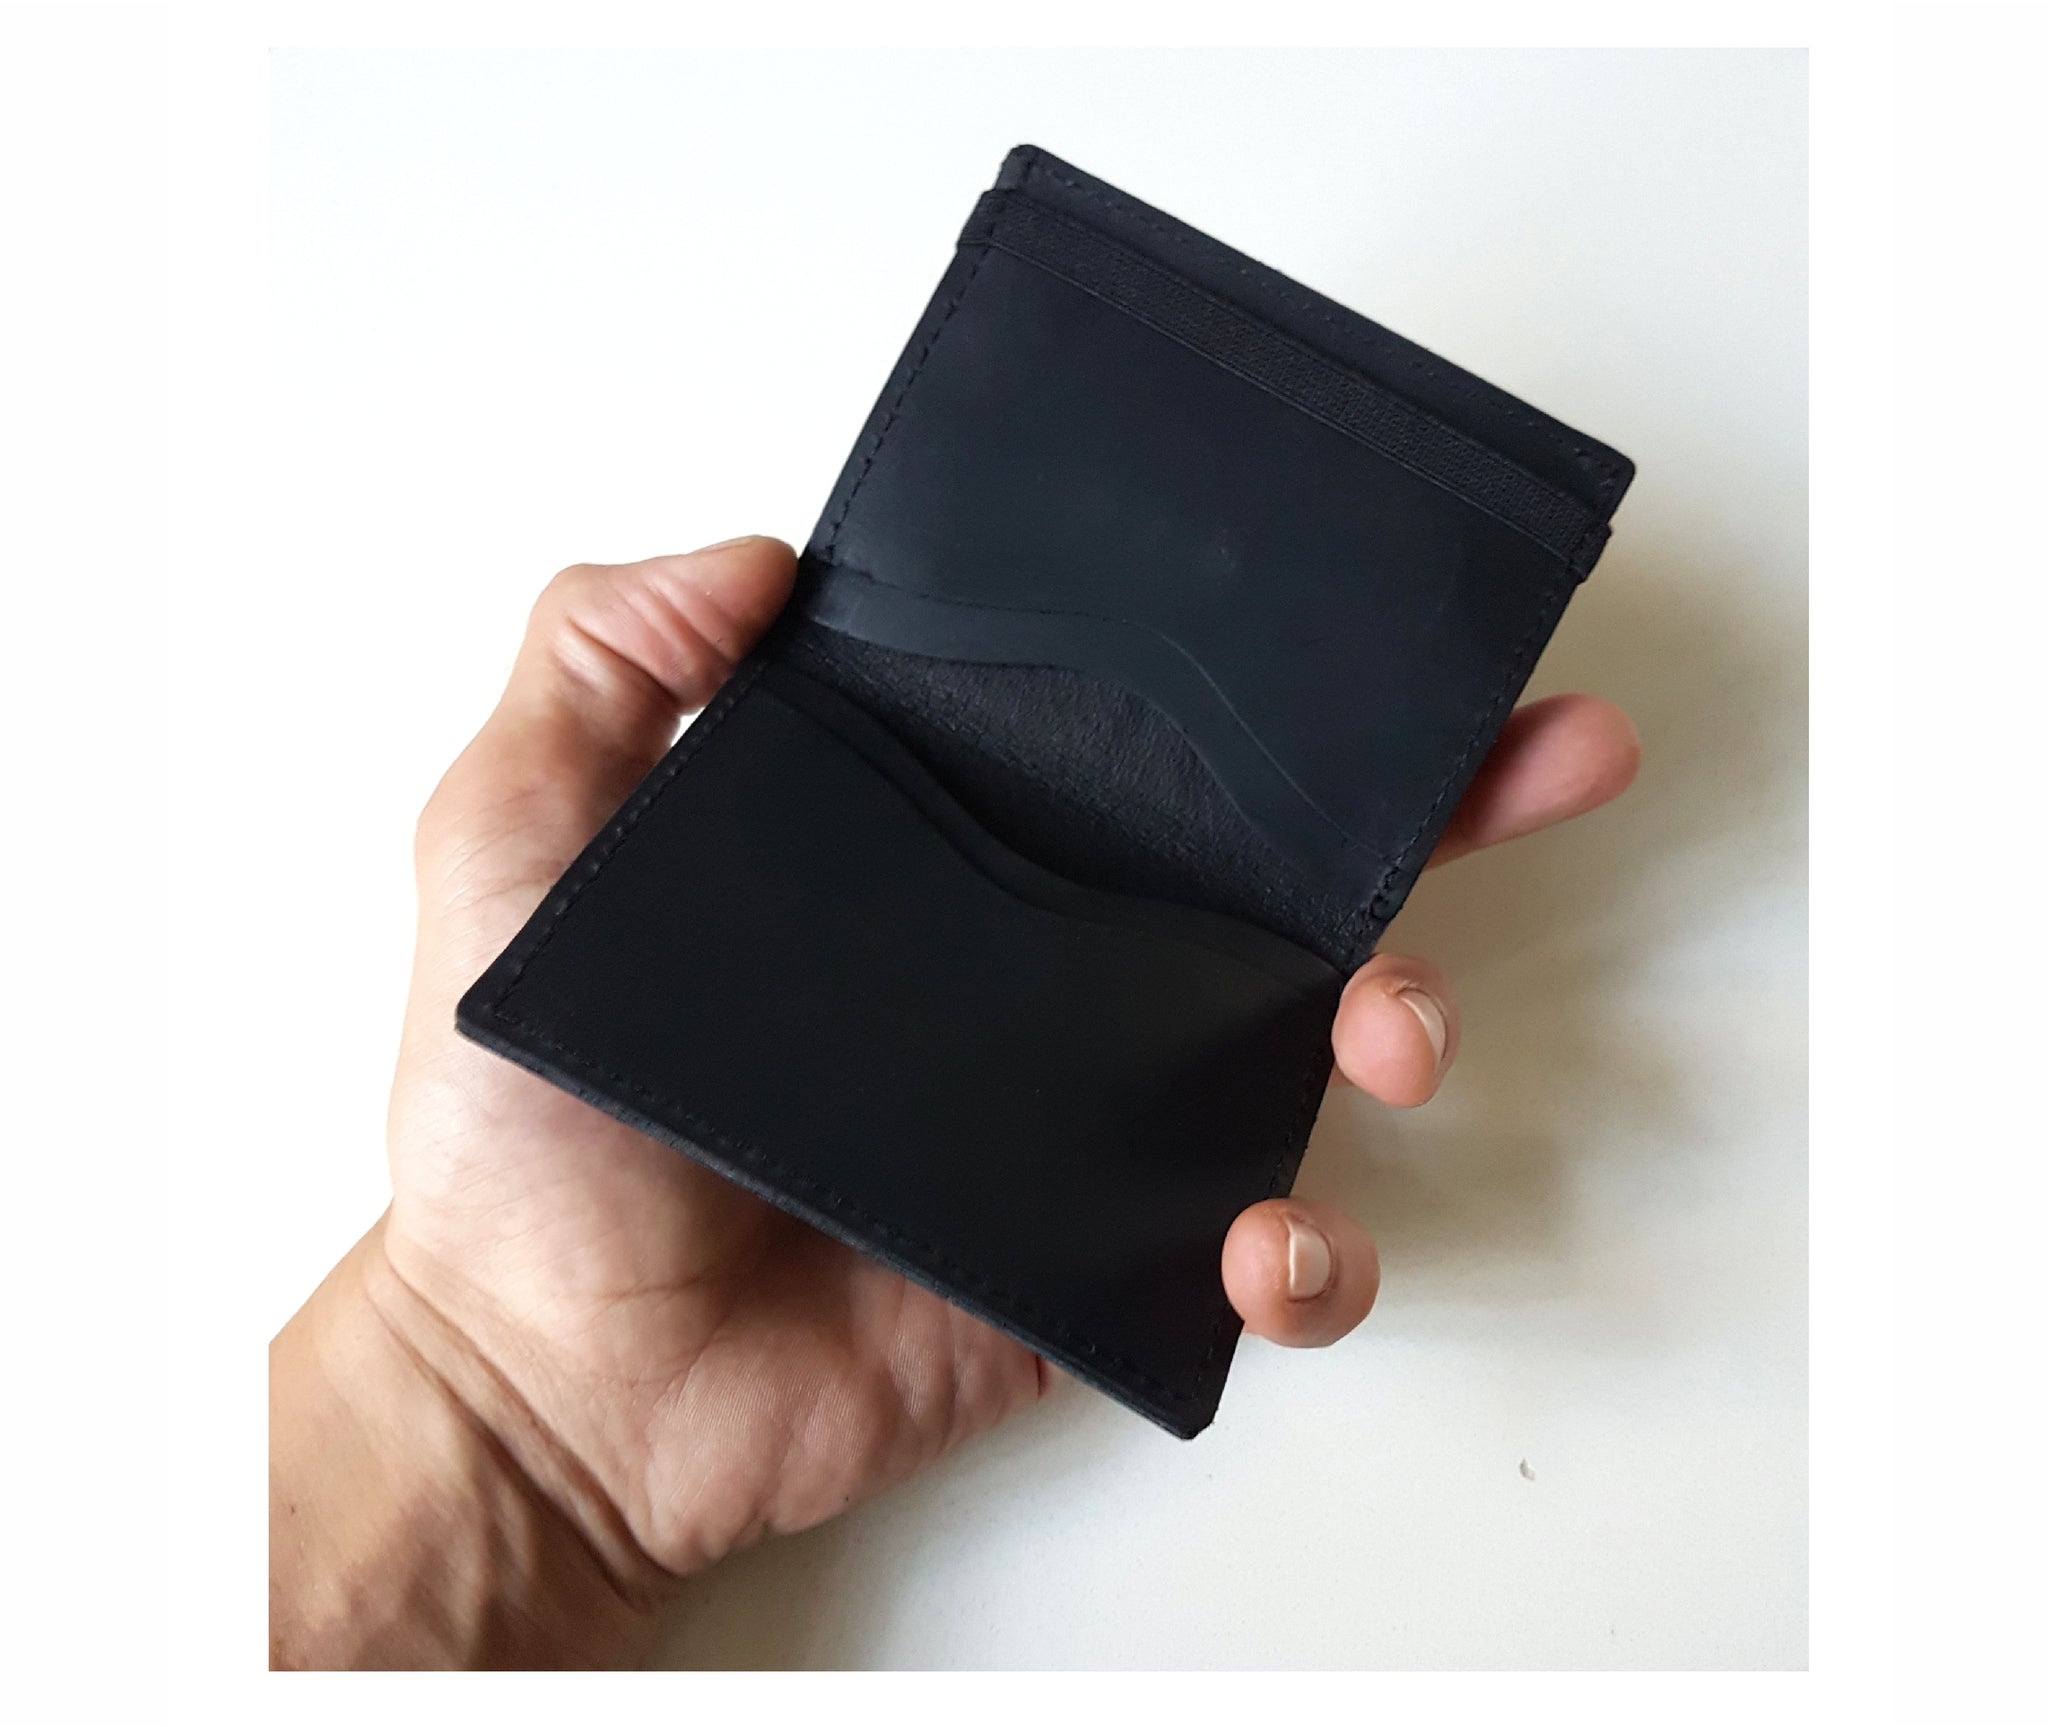 Black handmade Italian leather bifold wallet with a unique metal clip for bills and a coins pocket. The perfect lightweight slim wallet, cards wallet, and gift for men.